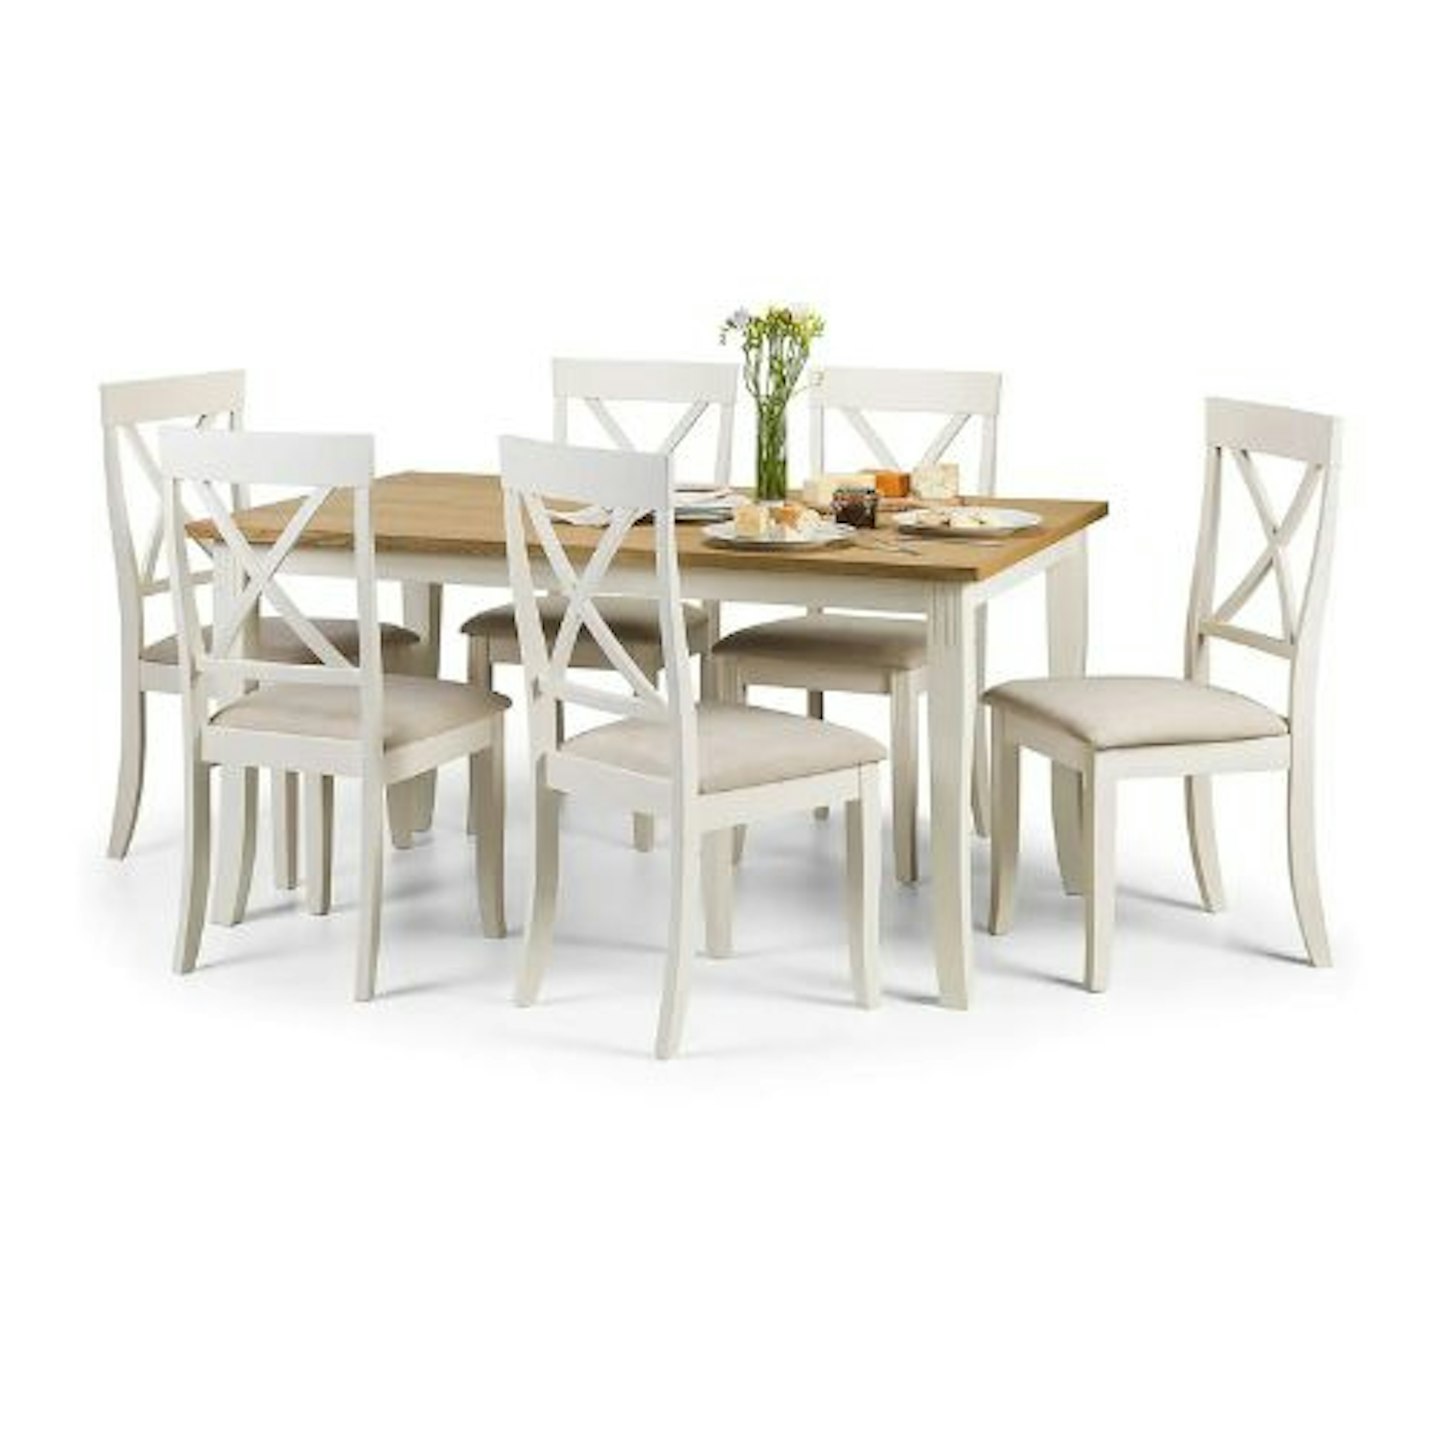 Davenport Dining Table with 6 Chairs